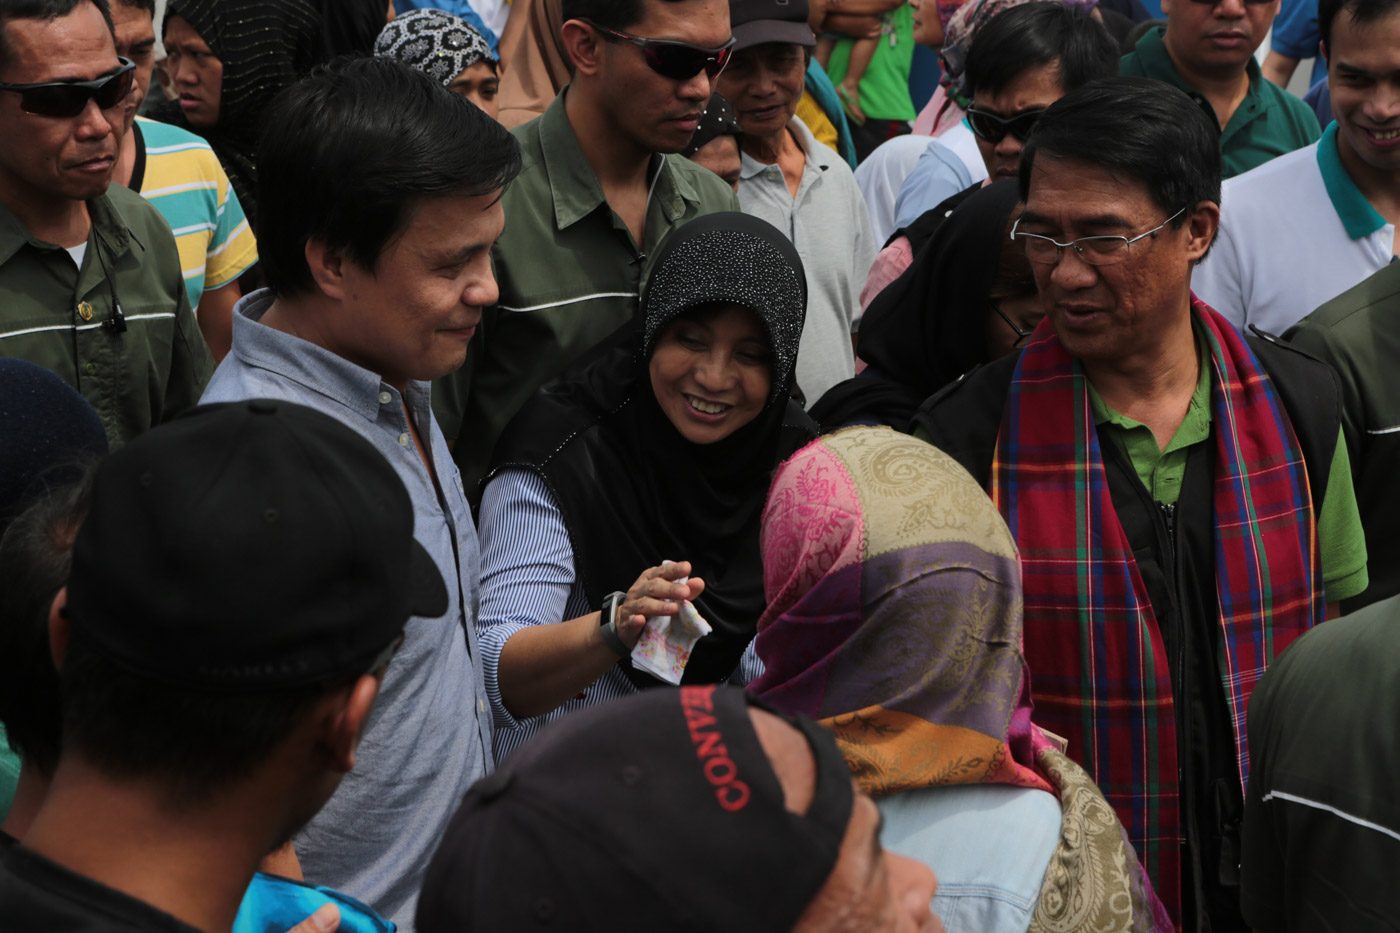 Robredo: In pandemic-time Eid’l Fitr, Muslim Filipinos linked by acts of kindness